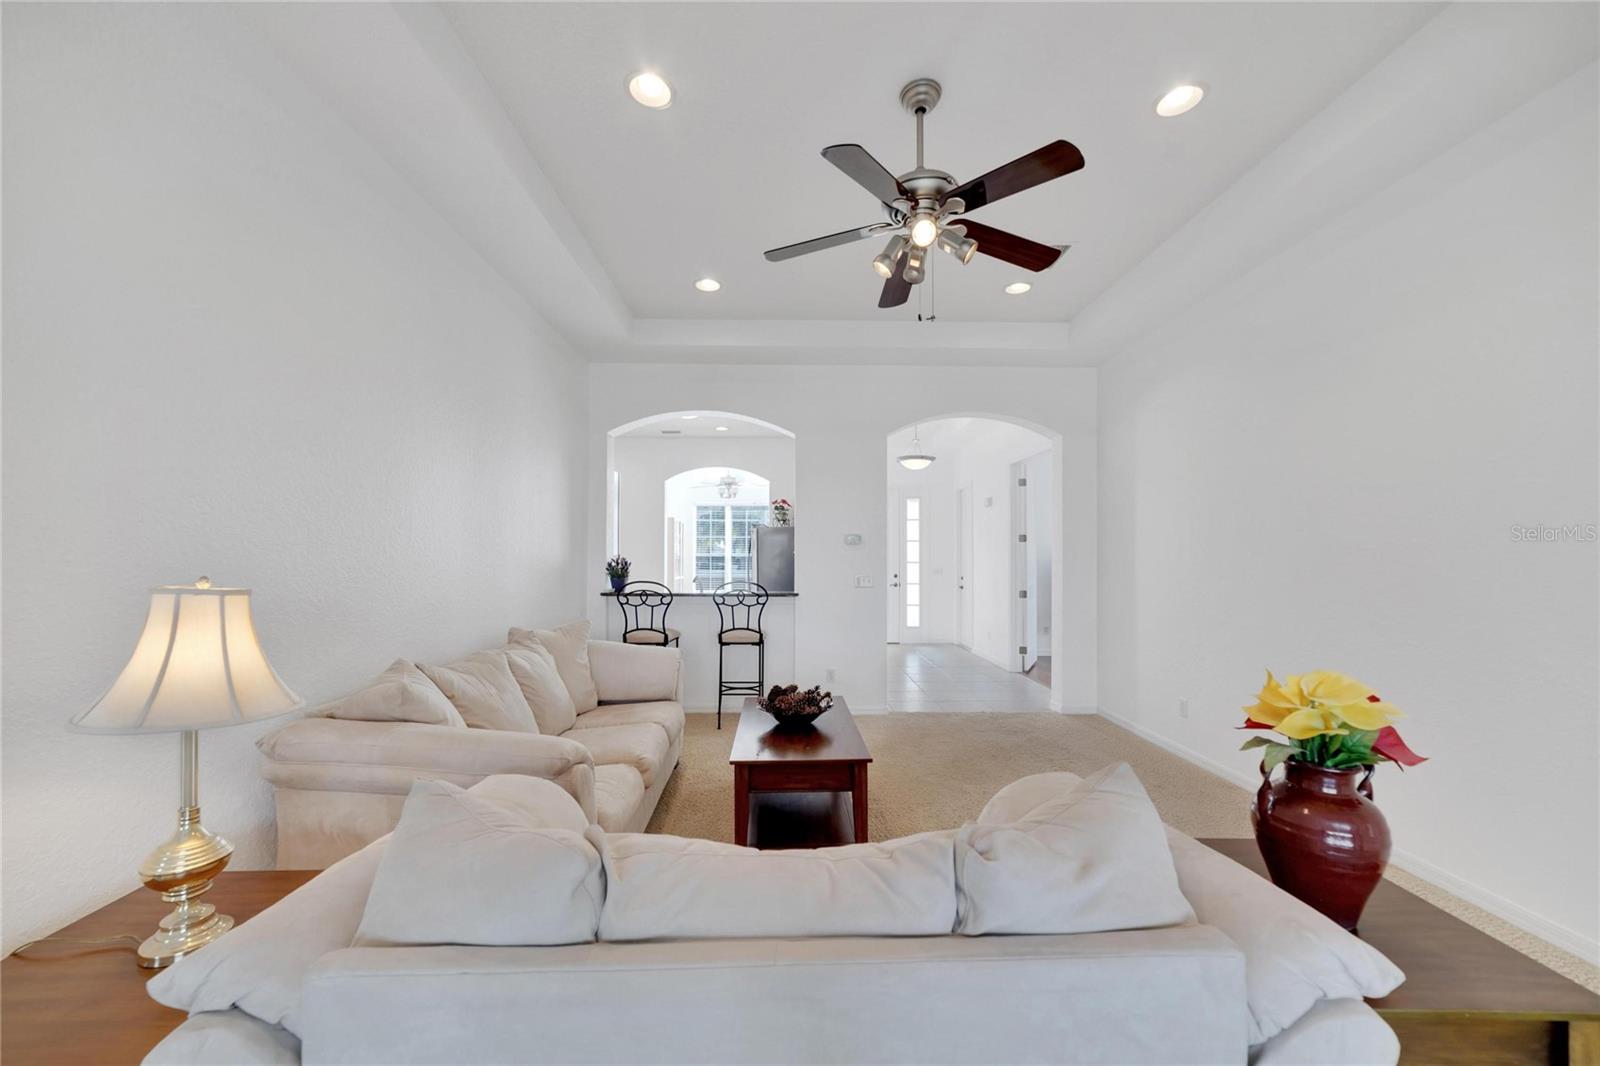 High tray ceilings, and arched entryways give this open and roomy home the feel of a much larger condo